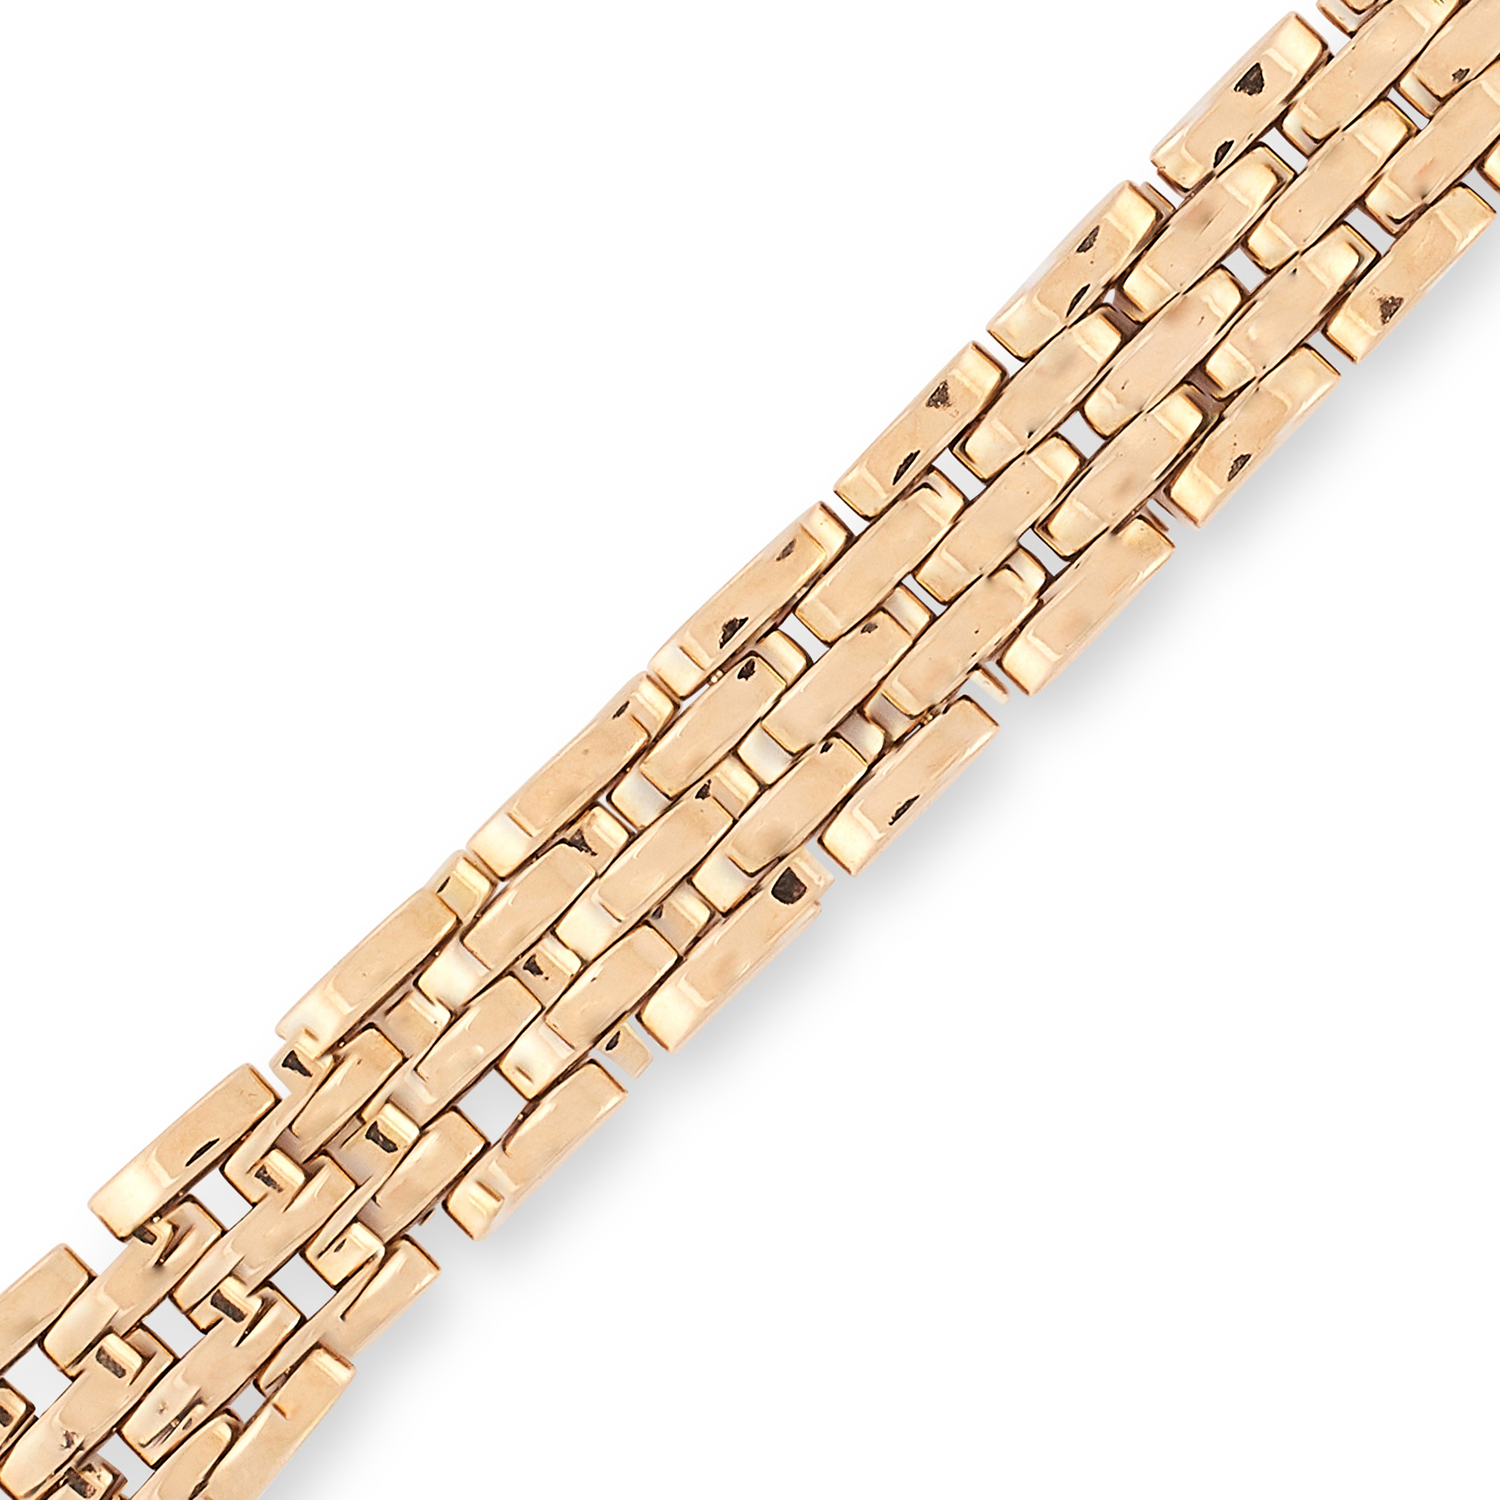 A MAILLON PANTHERE BRACELET, CARTIER designed as a five rows of chain links, signed Cartier and - Image 2 of 2